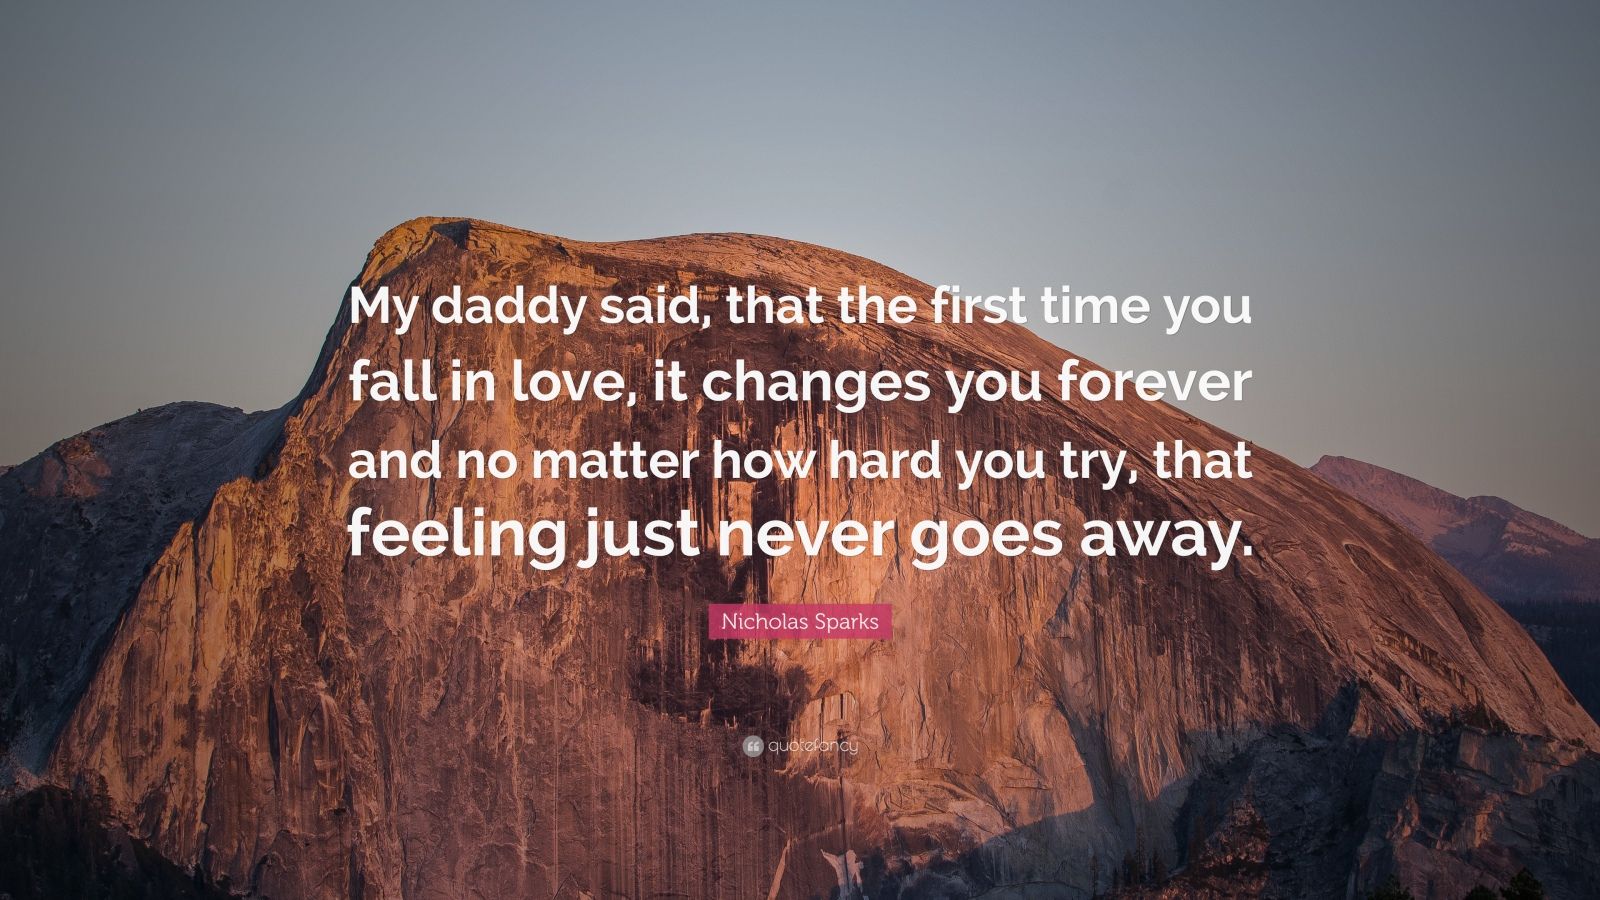 Nicholas Sparks Quote: “My daddy said, that the first time you fall in ...